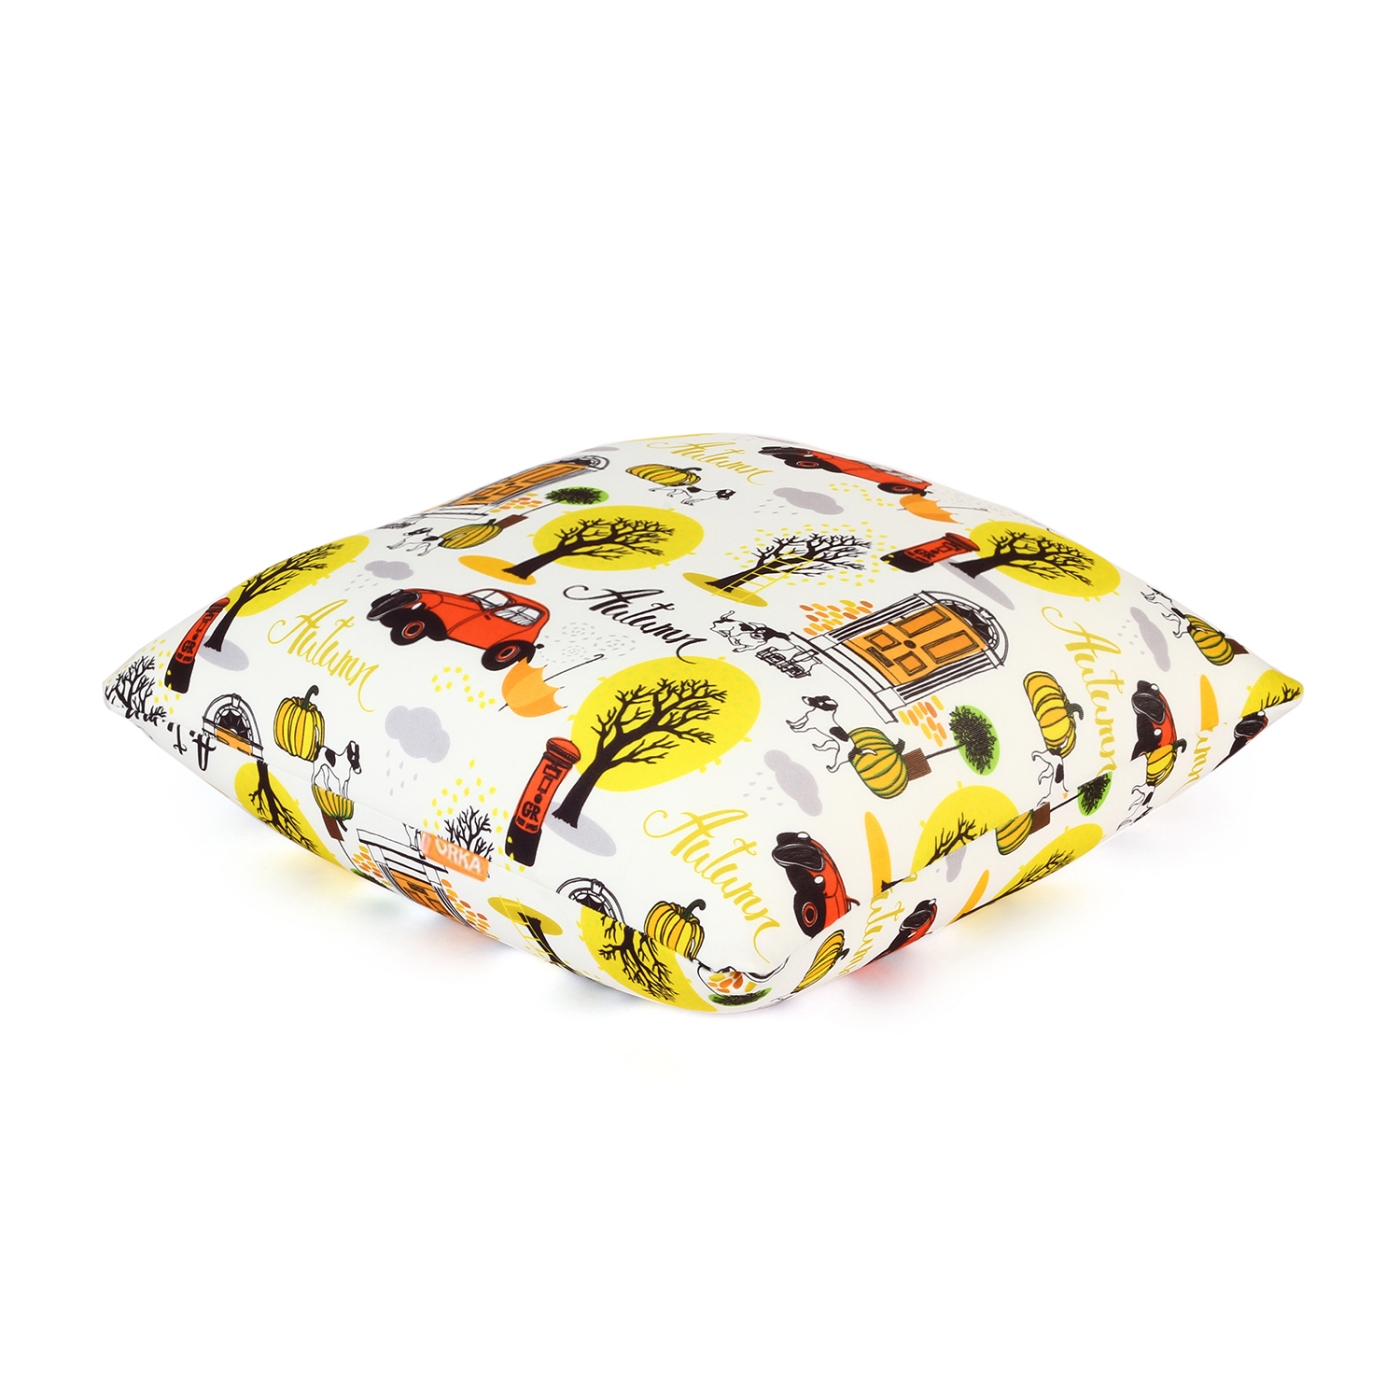 ORKA Digital Printed Spandex Filled With Microbeads Square Cushion 14 X 14 Inch - Yellow, White  